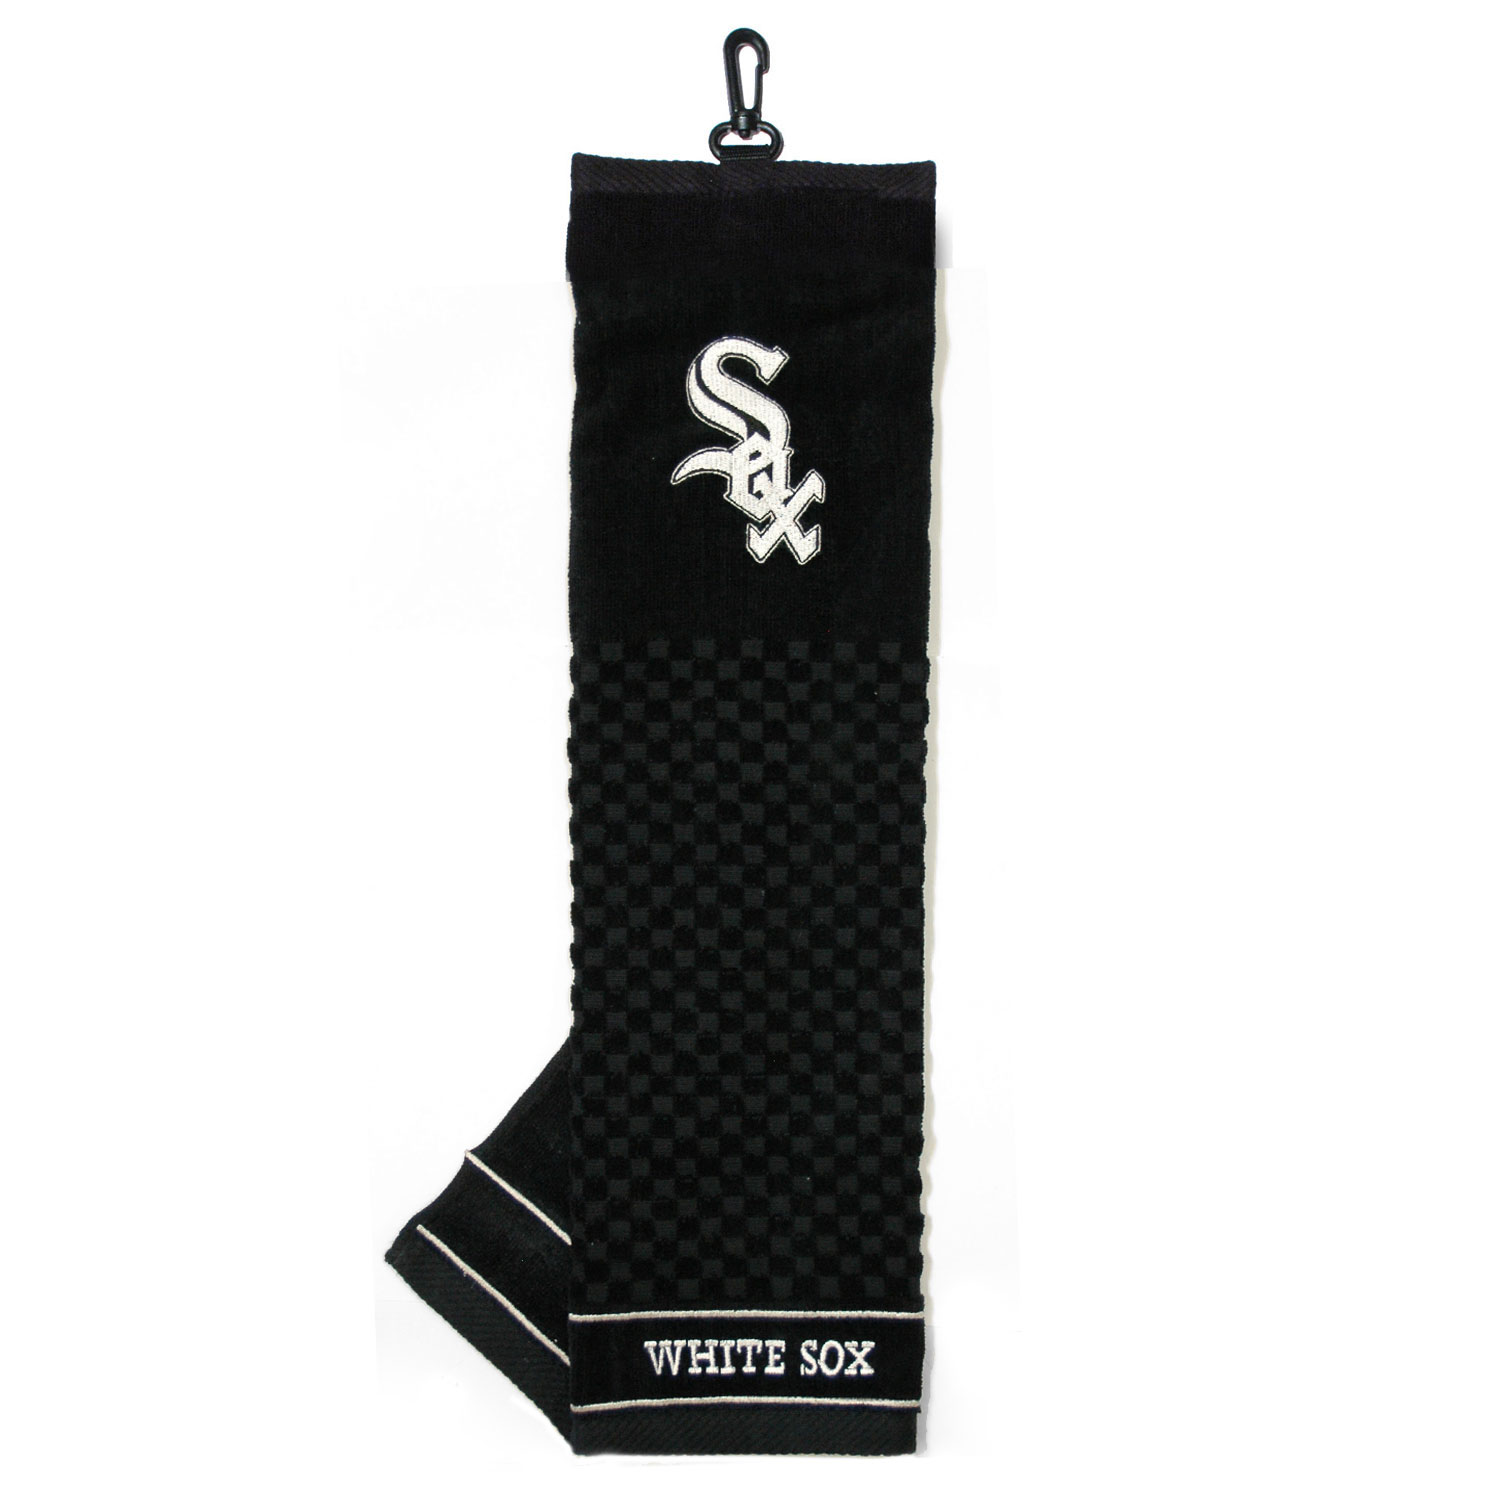 Chicago White Sox Embroidered Towel